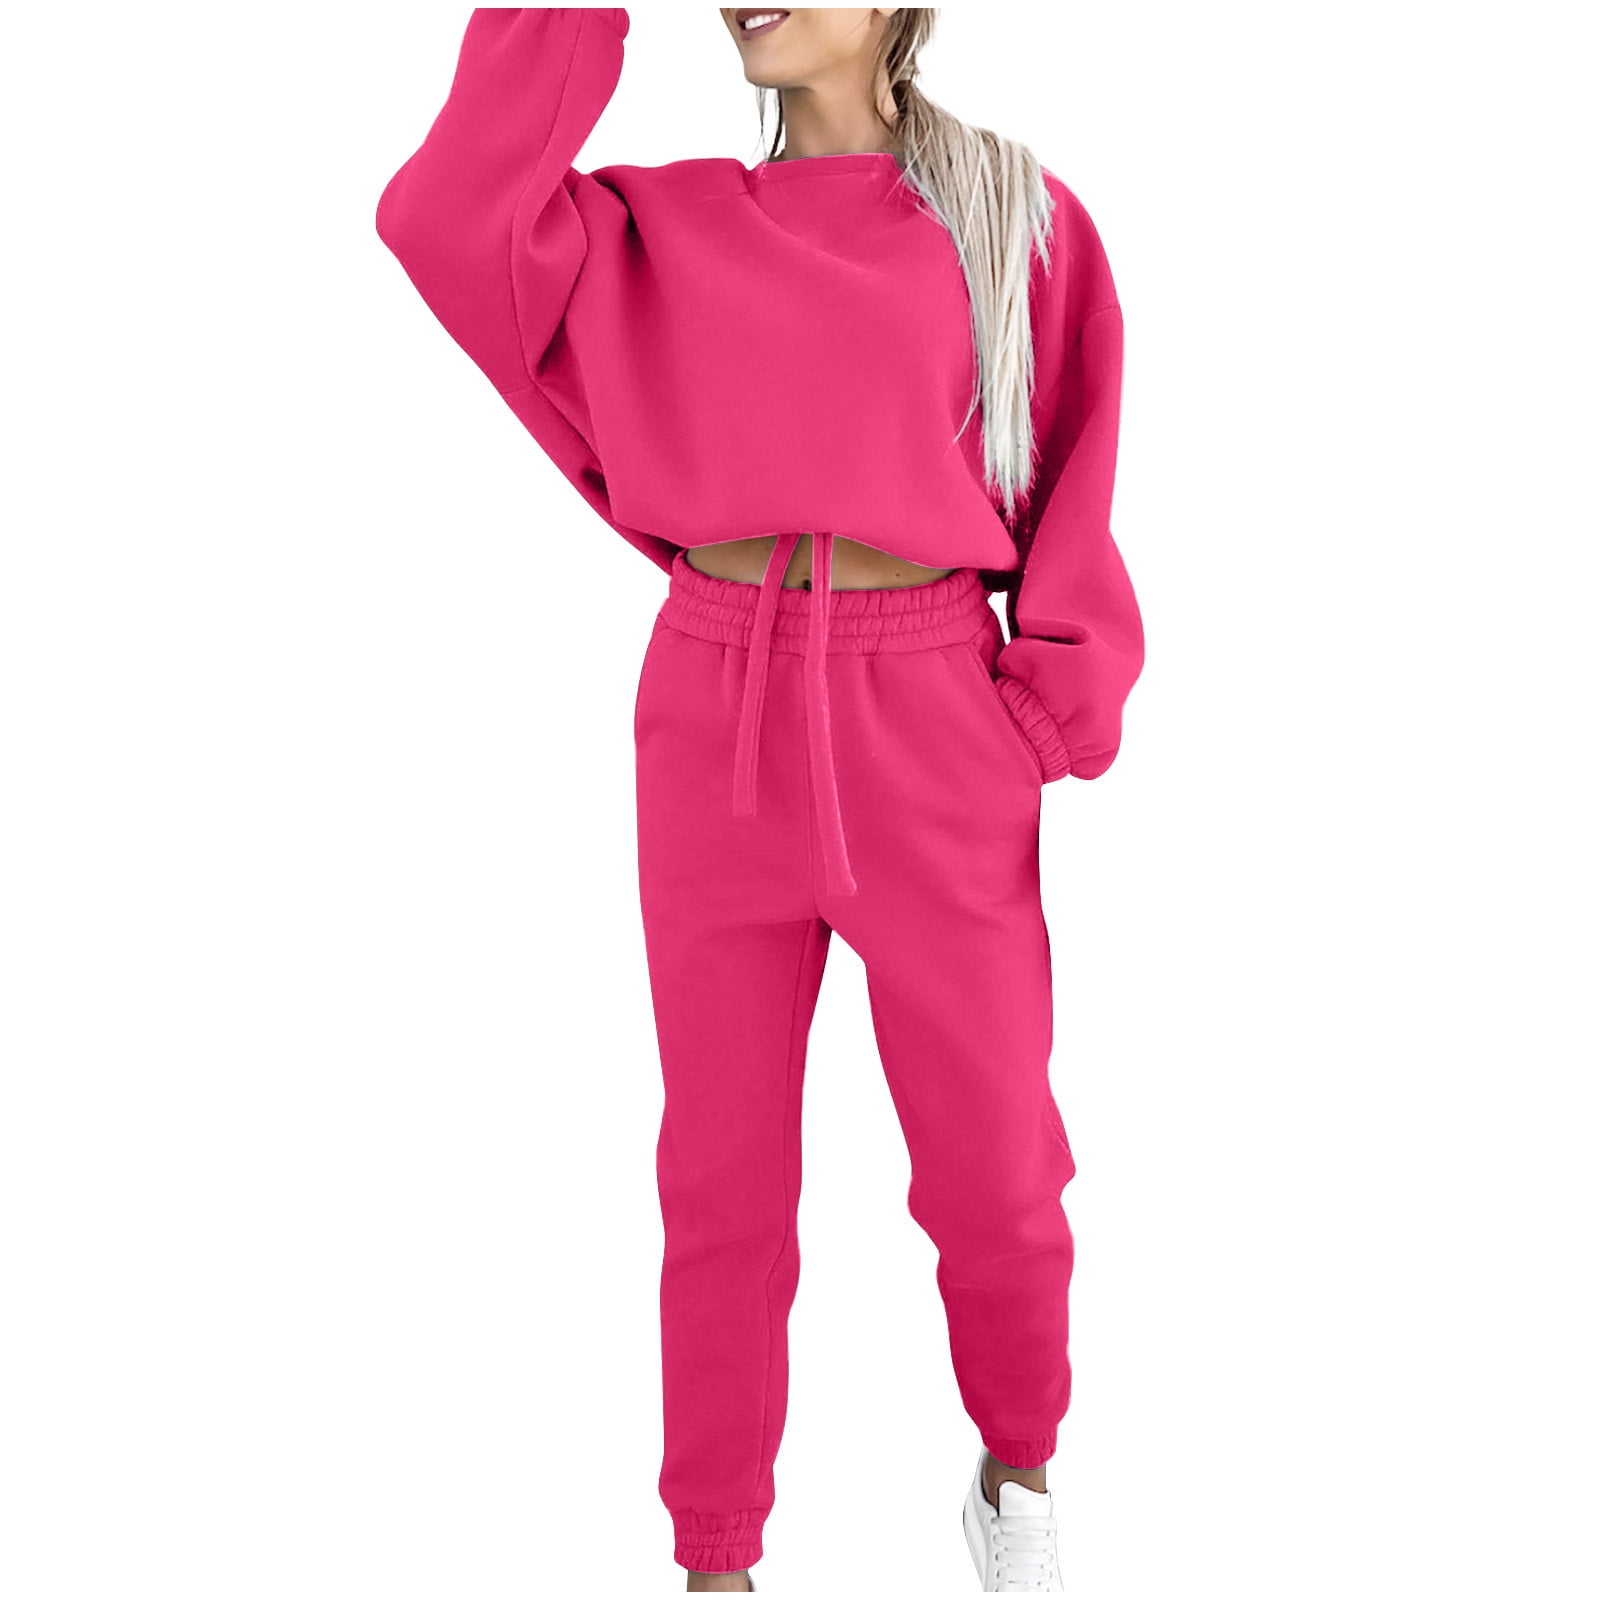 BLVB Women's Tracksuits 2 Piece Outfits Casual Baggy Pullover Sweatshirt  and Sweatpants Sets Fall Winter Sweatsuit 